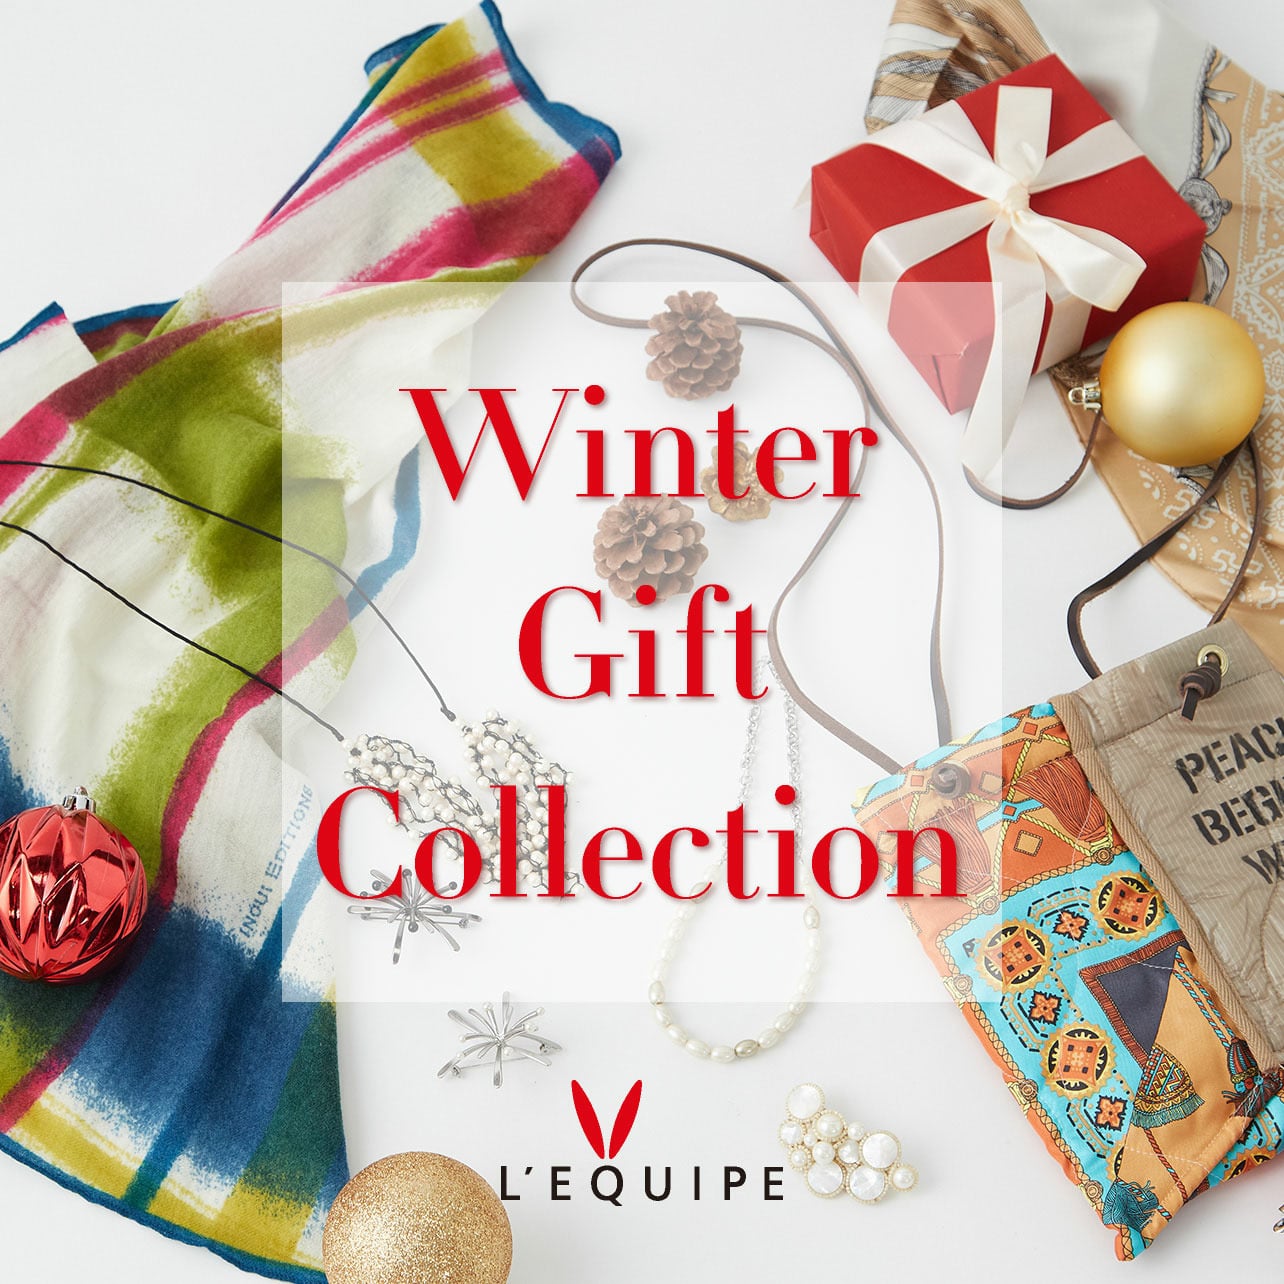 Winter Gift Collection							 					